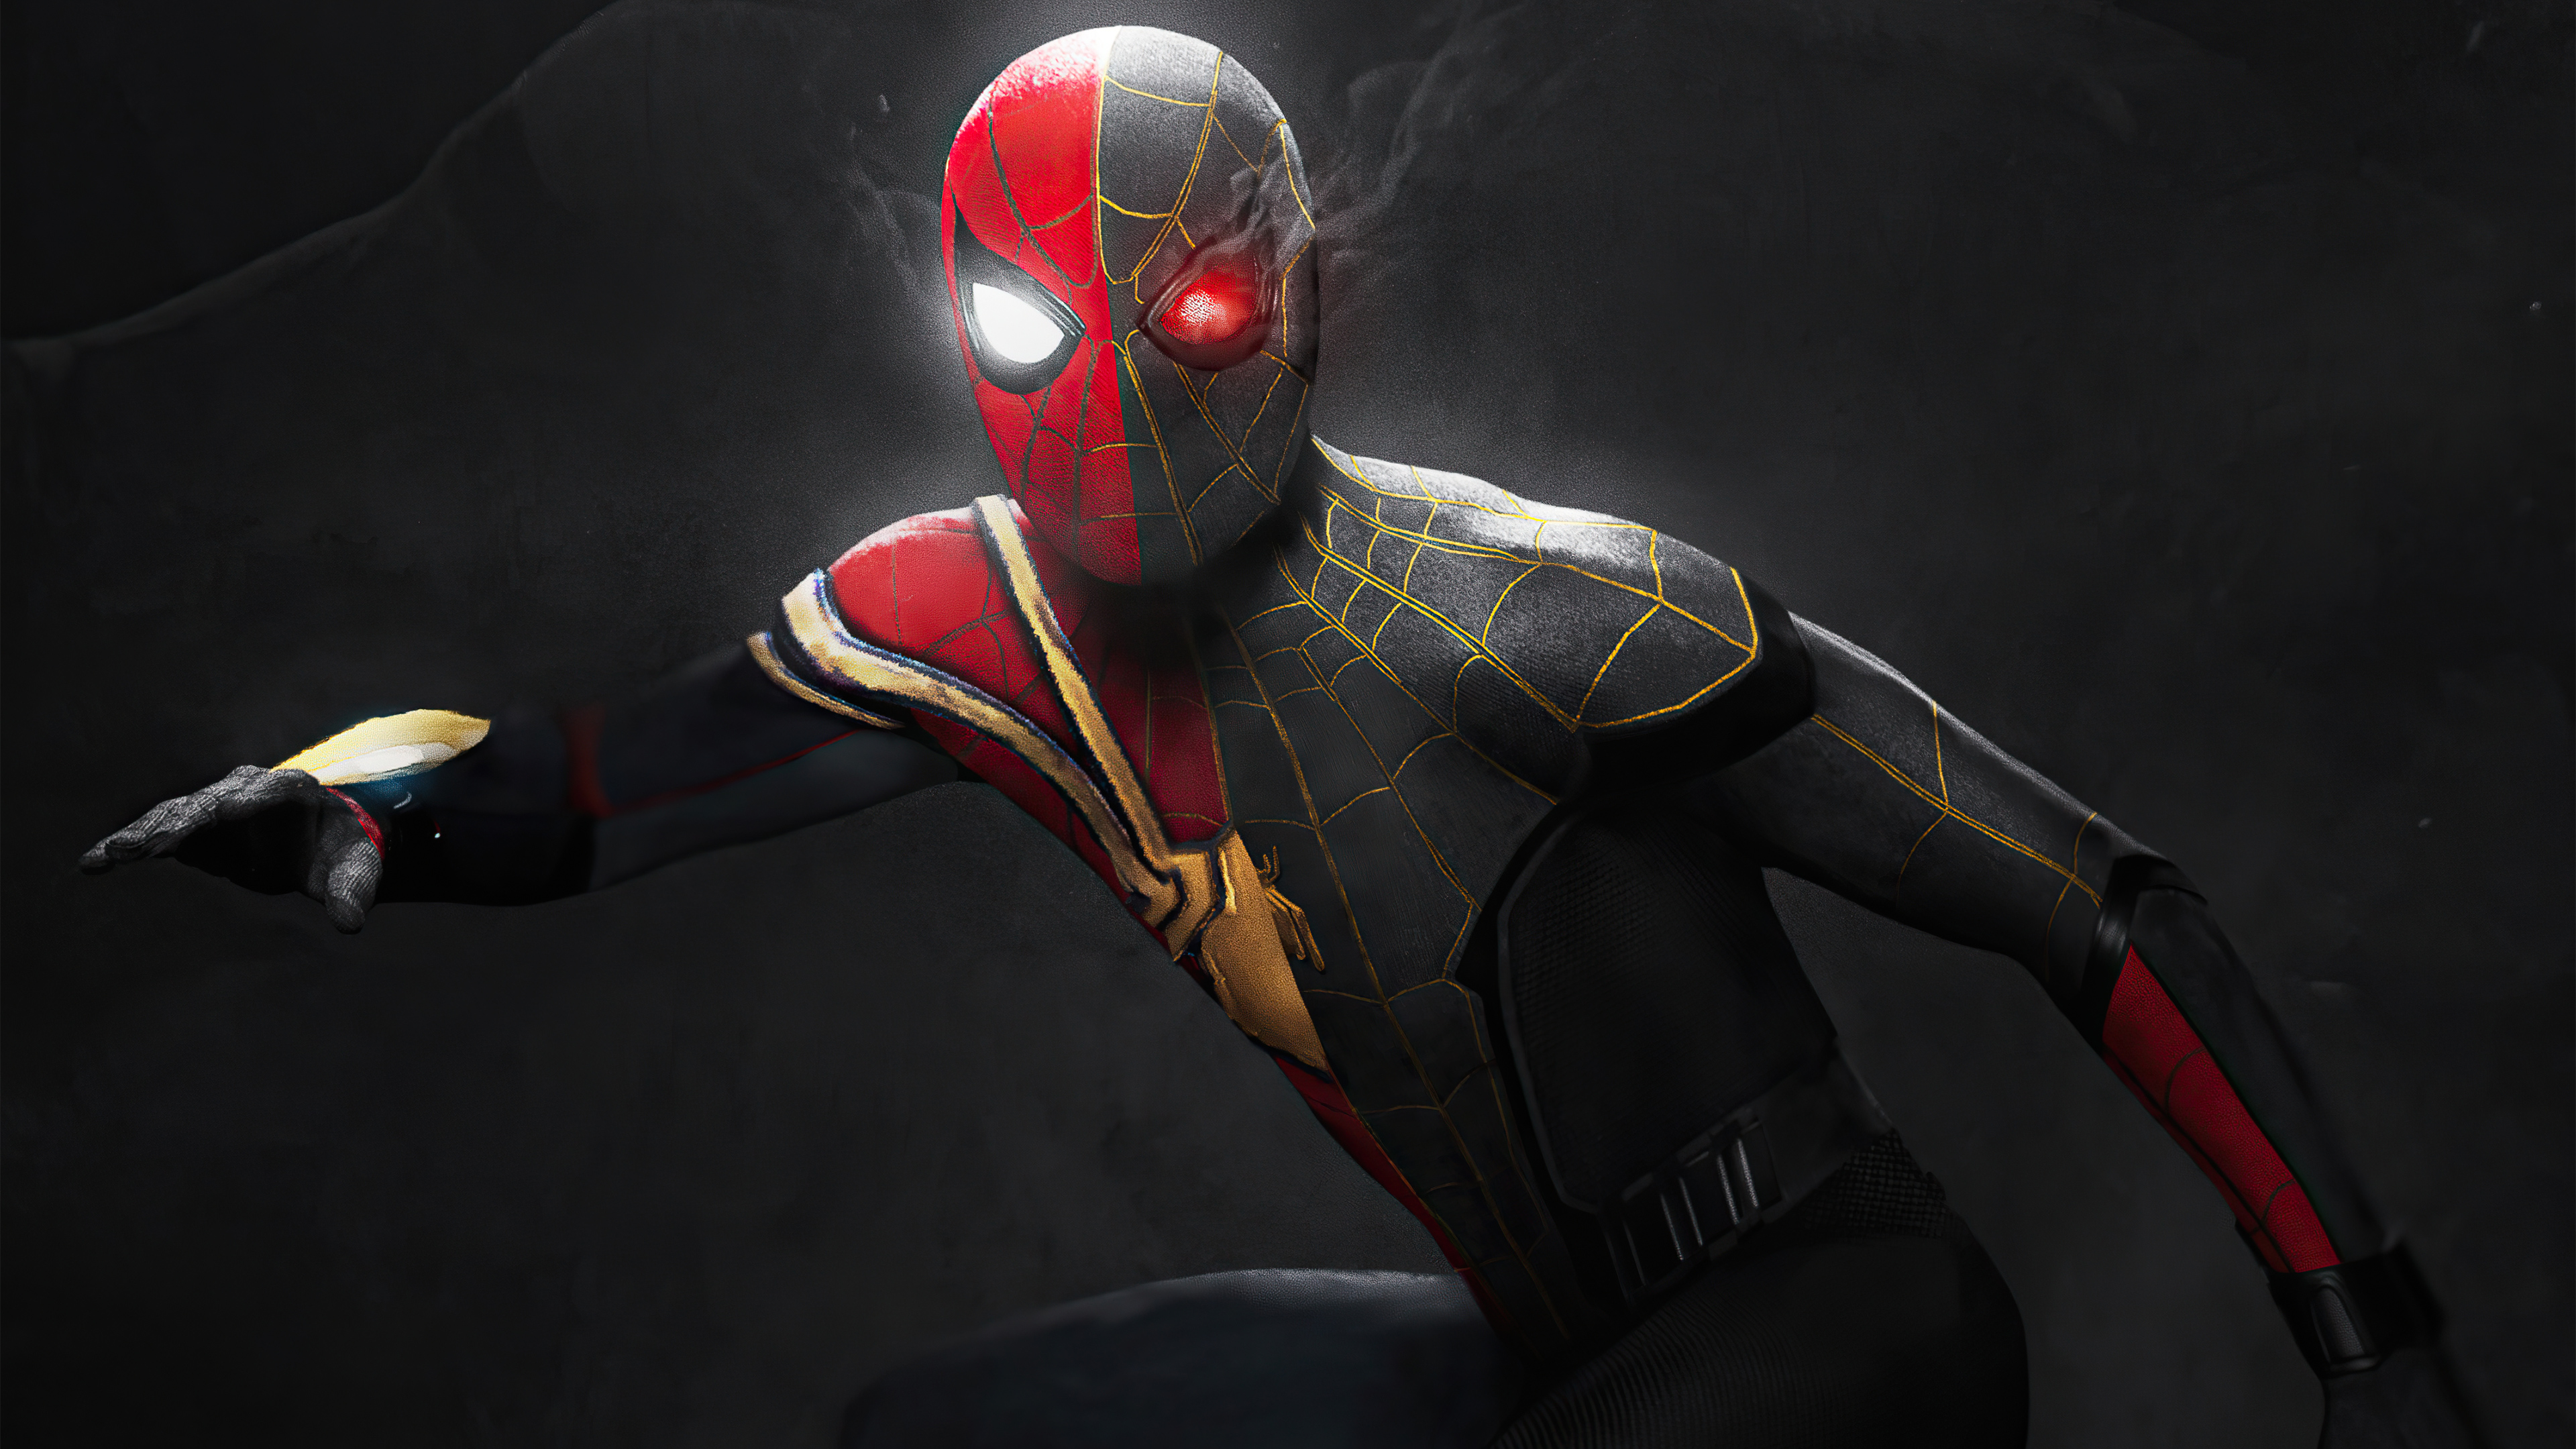 Iron Spider X Gold Suit 4k, HD Superheroes, 4k Wallpaper, Image, Background, Photo and Picture